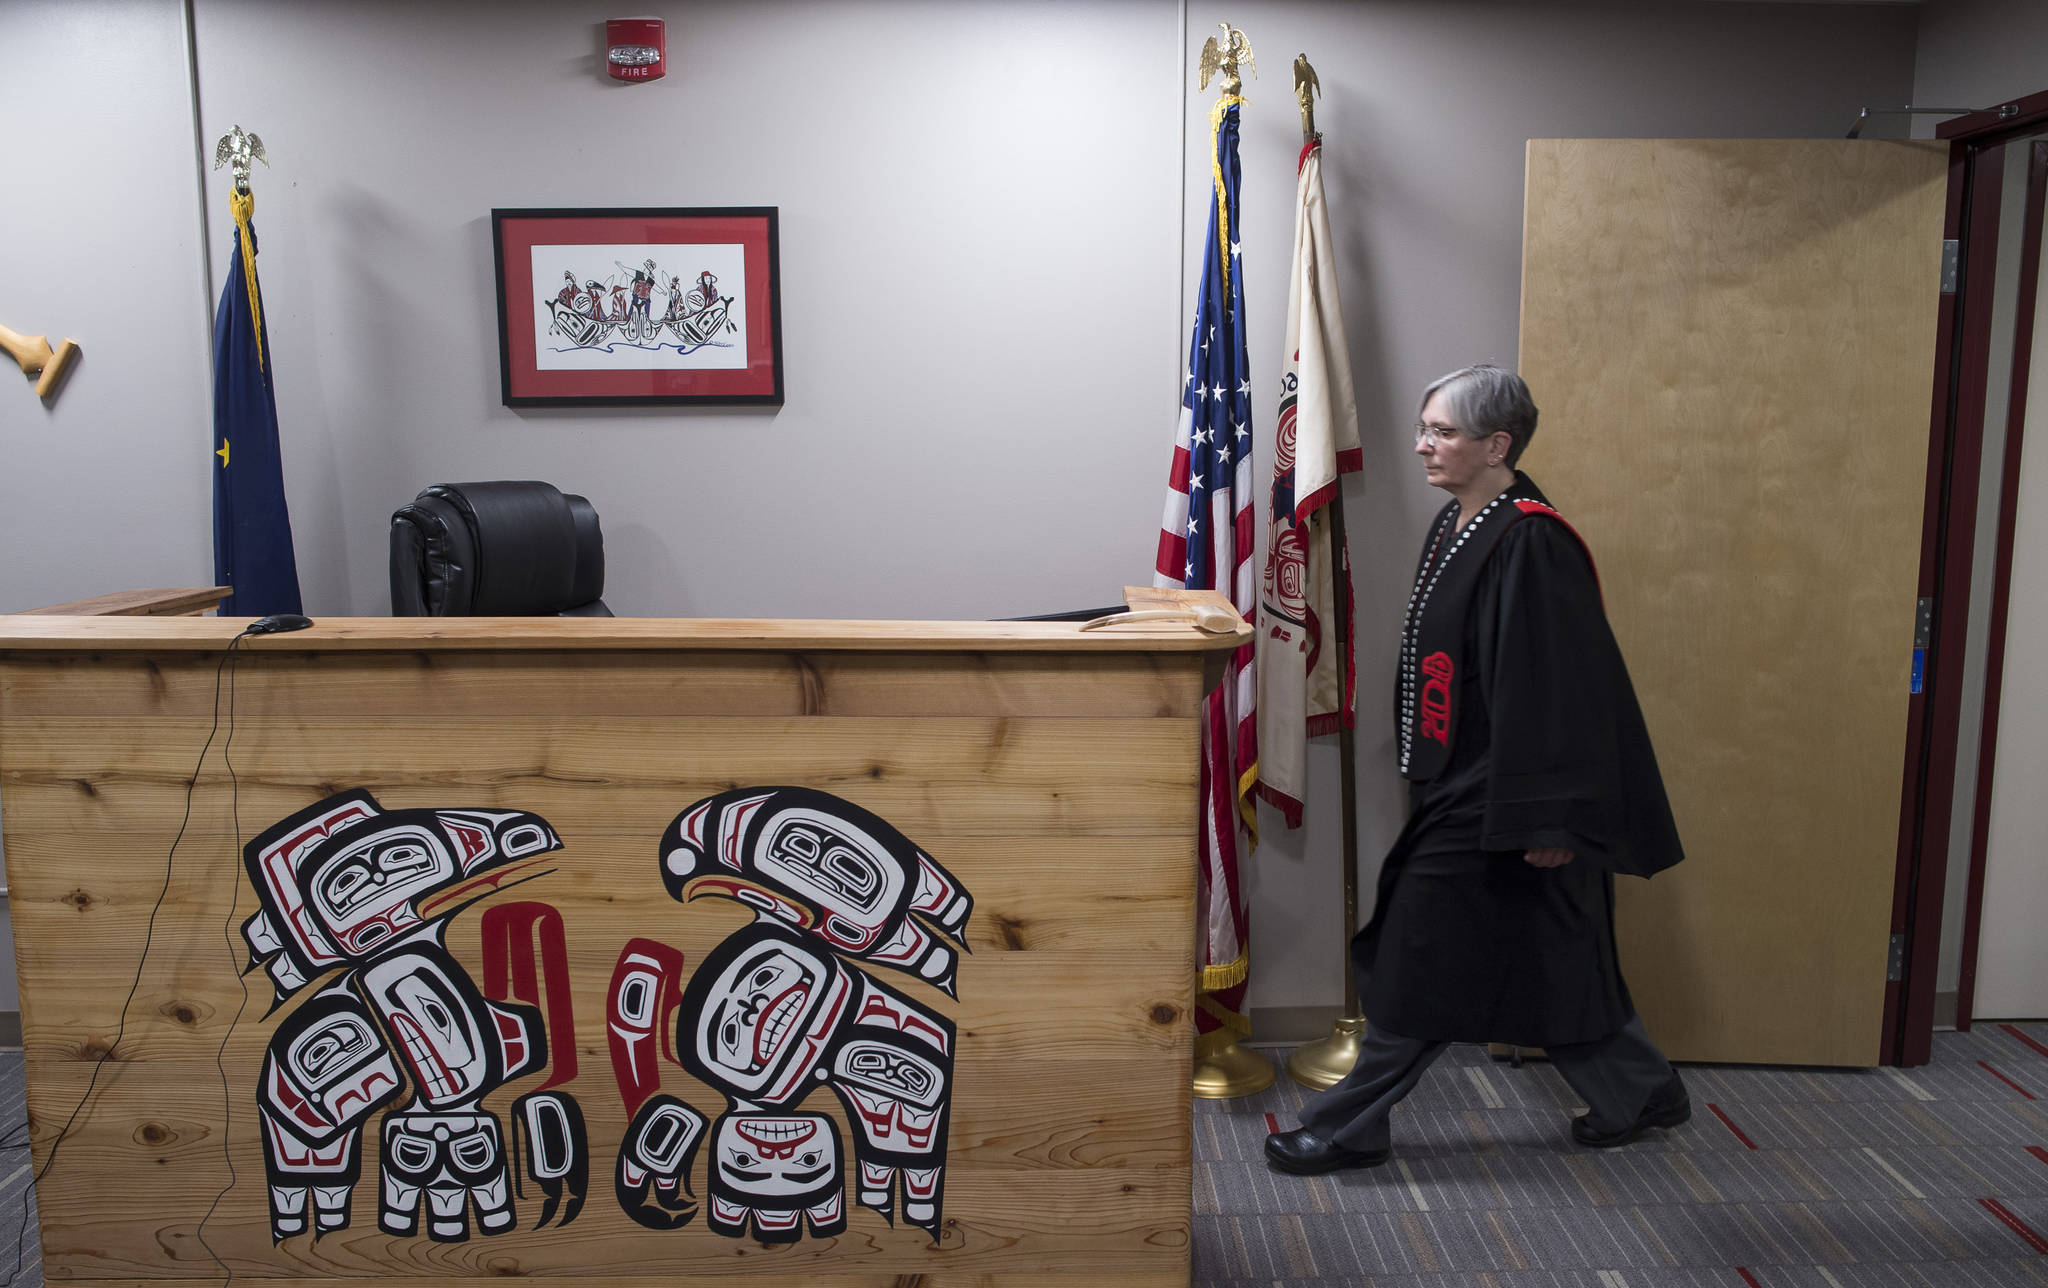 Judge Debra O’Gara enters the Central Council Tlingit and Haida Indian Tribes of Alaska’s Tribal Court on Wednesday, March 14, 2018. (Michael Penn | Juneau Empire)